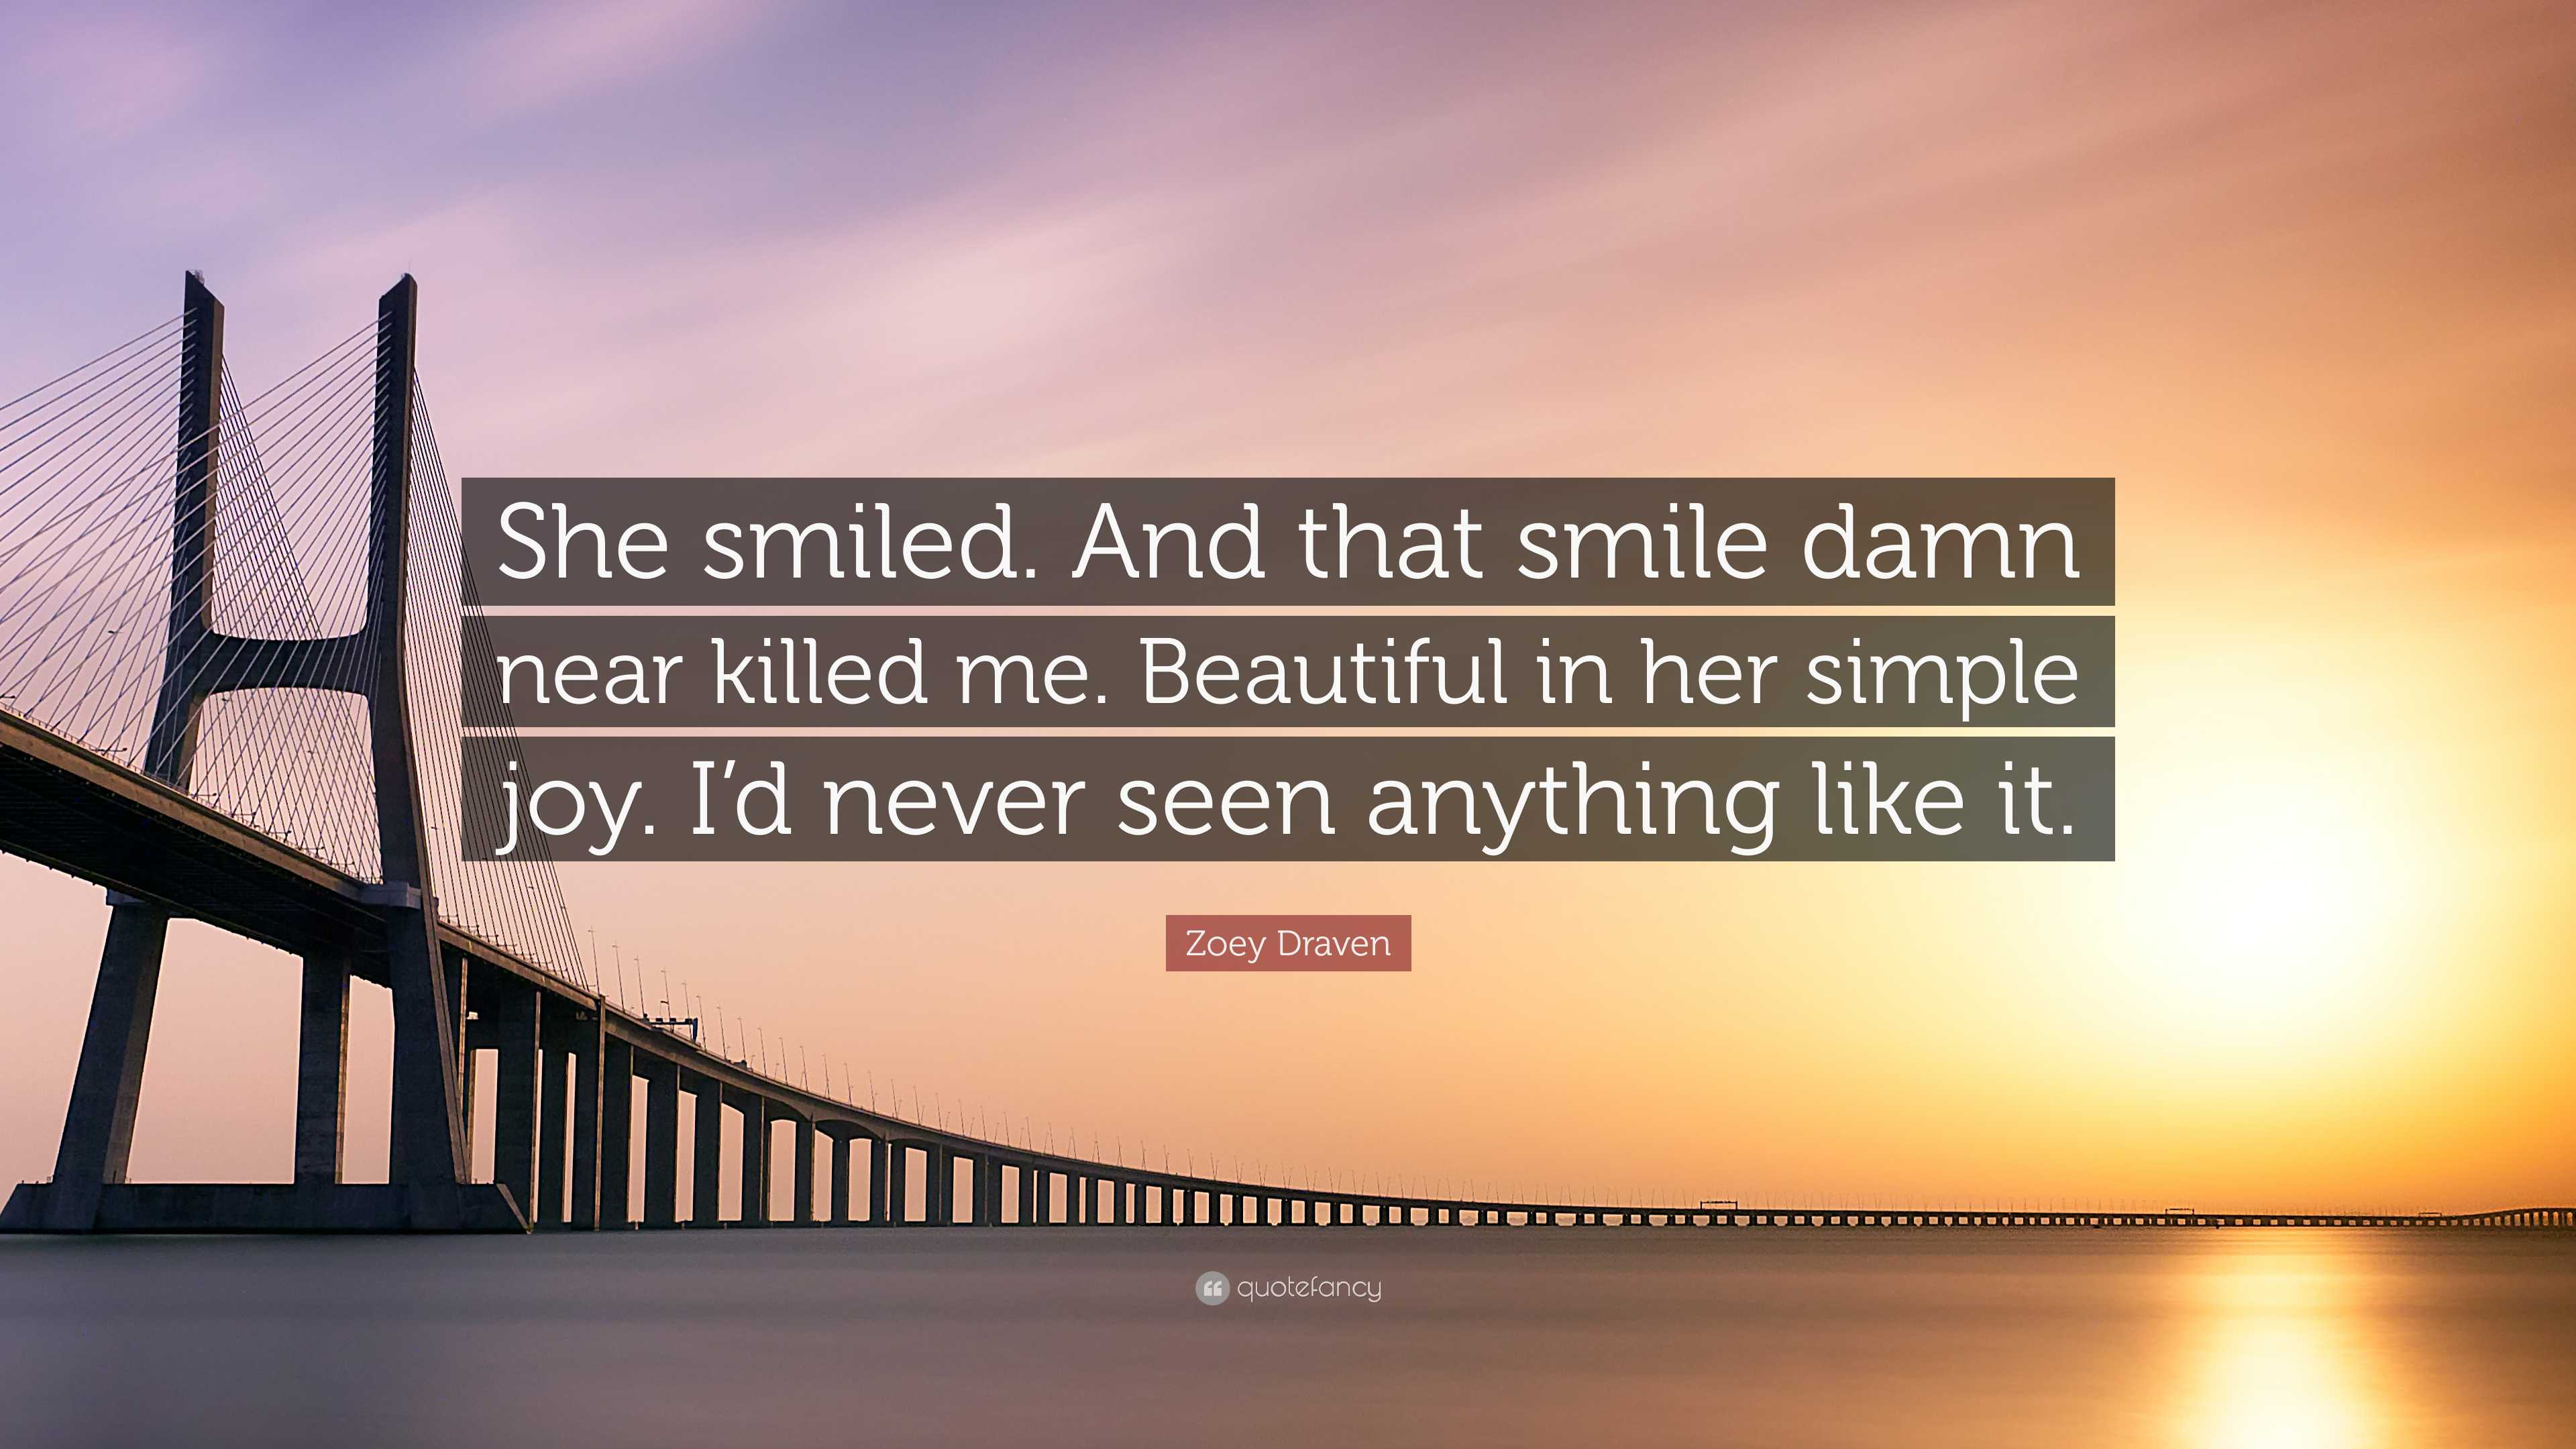 Zoey Draven Quote: “She smiled. And that smile damn near killed me.  Beautiful in her simple